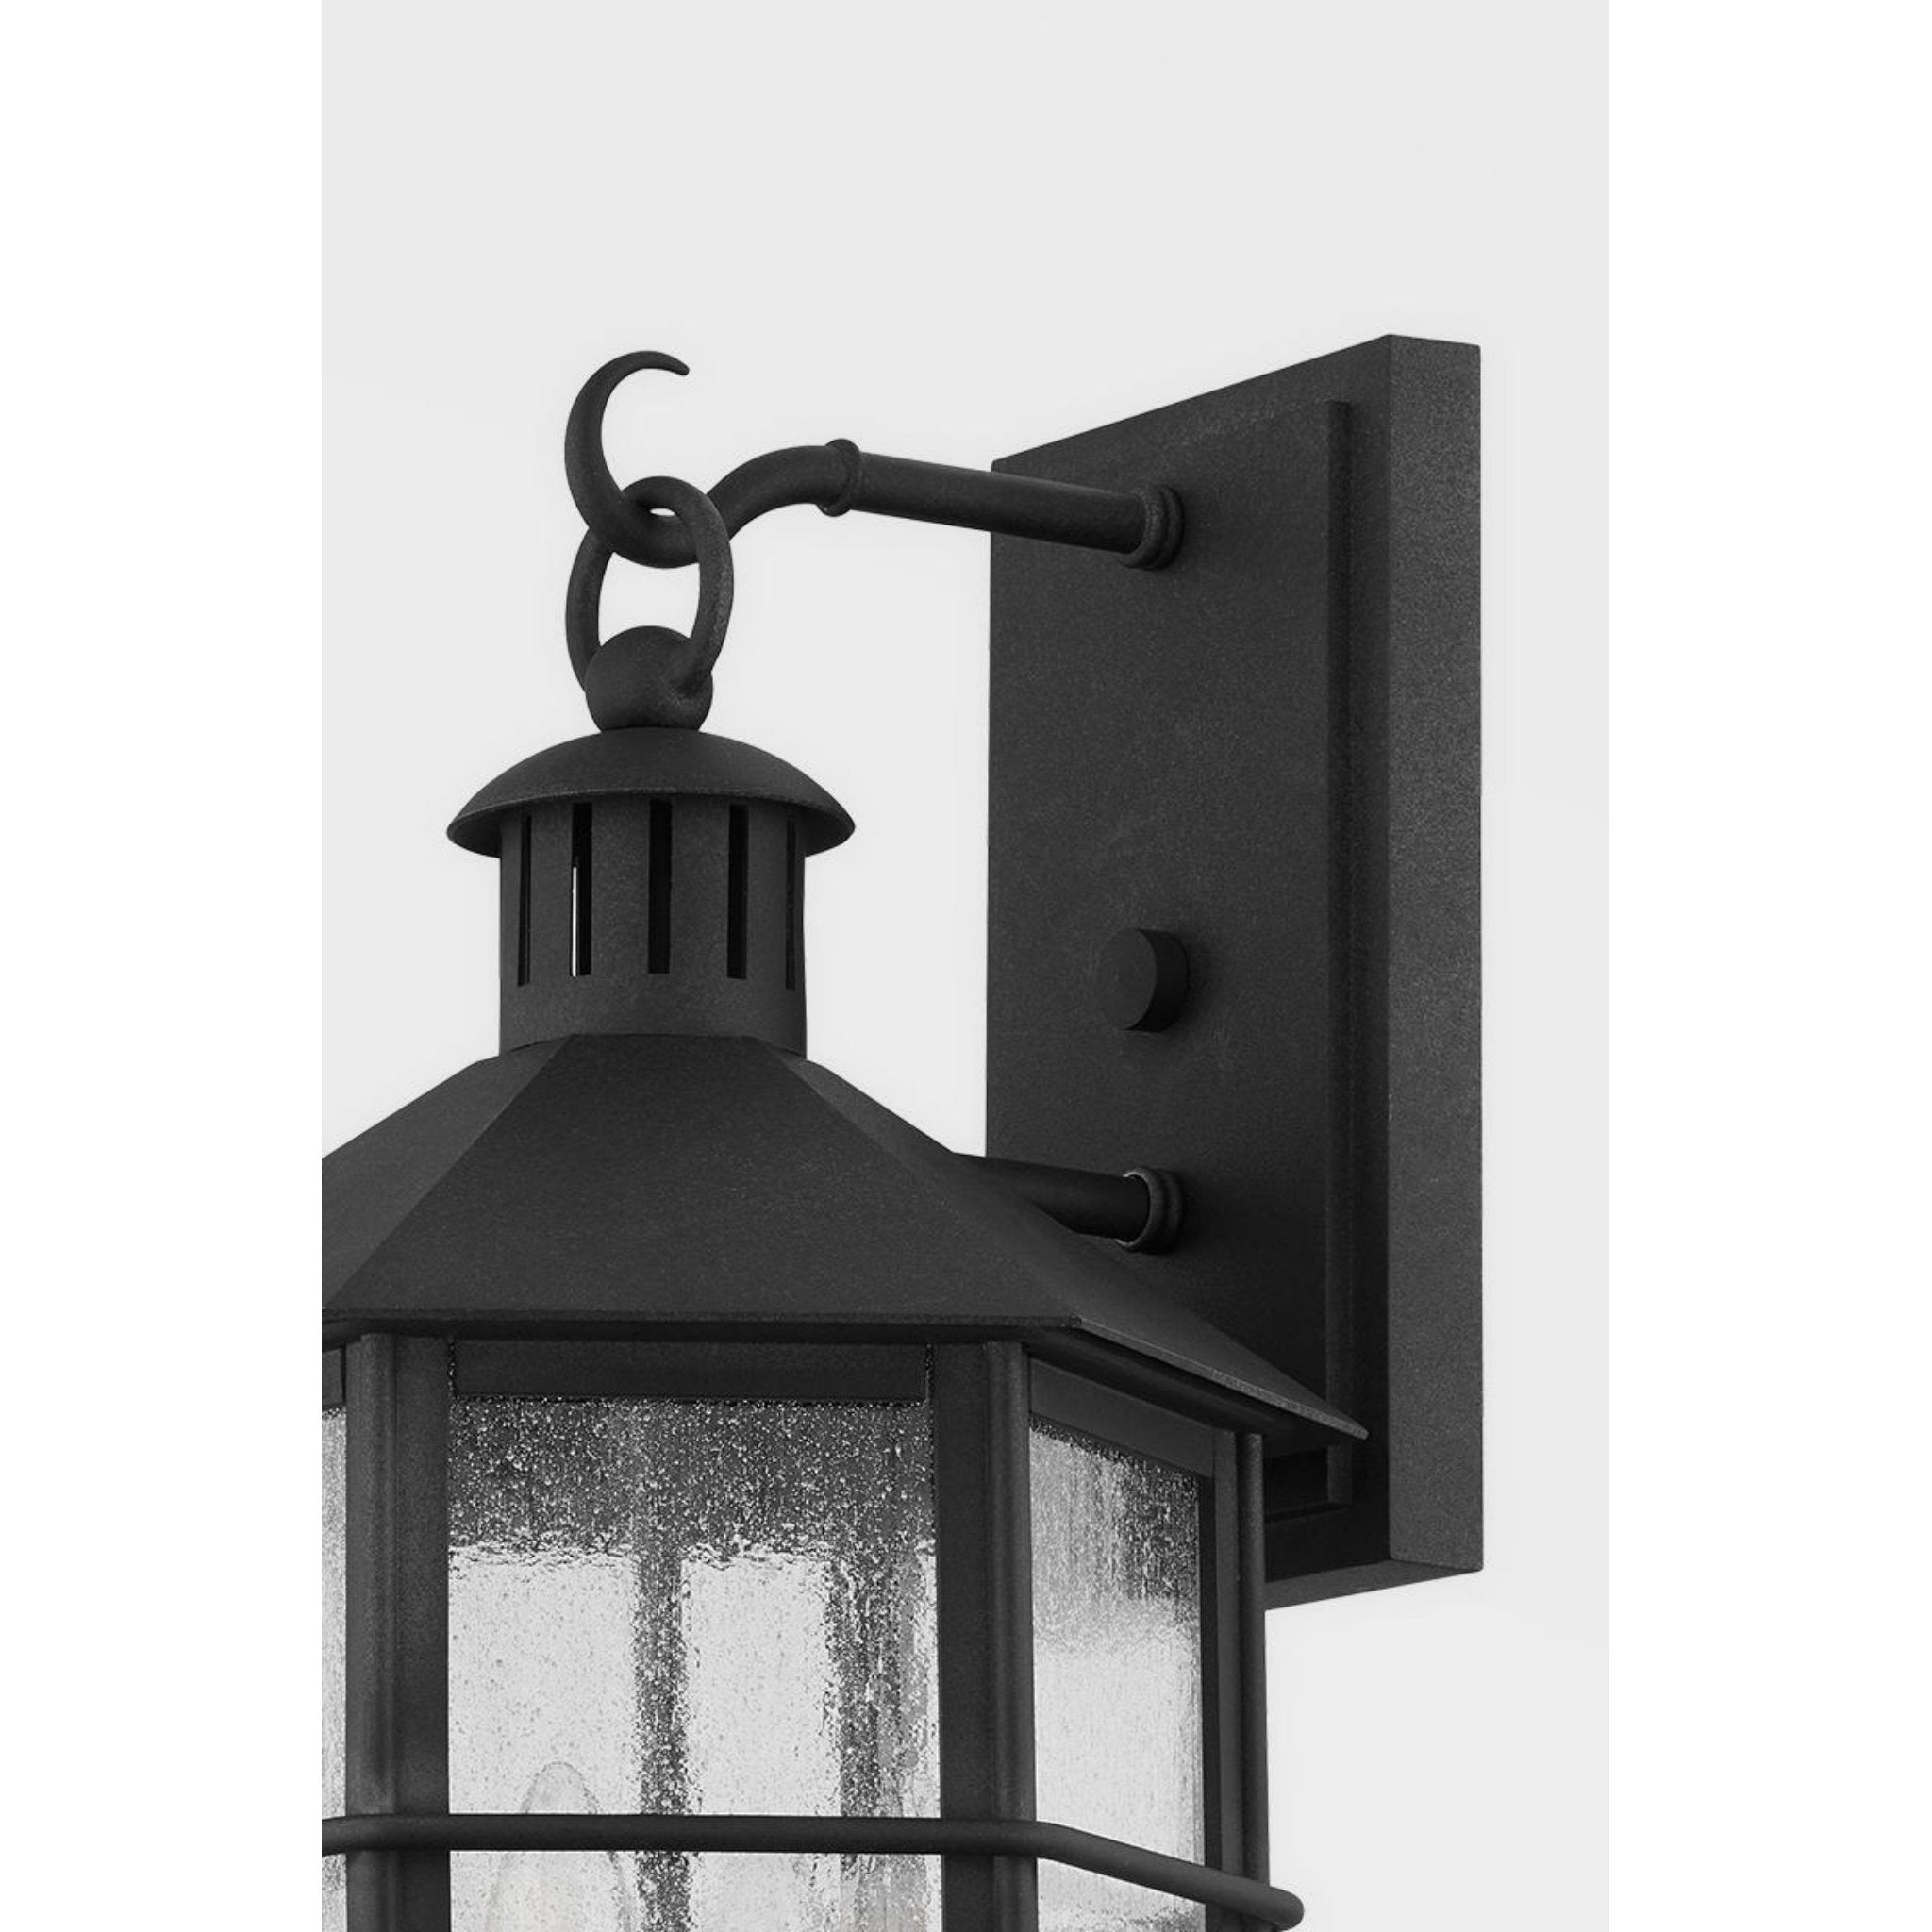 Lake County 4 Light Wall Sconce in French Iron by Mark D. Sikes